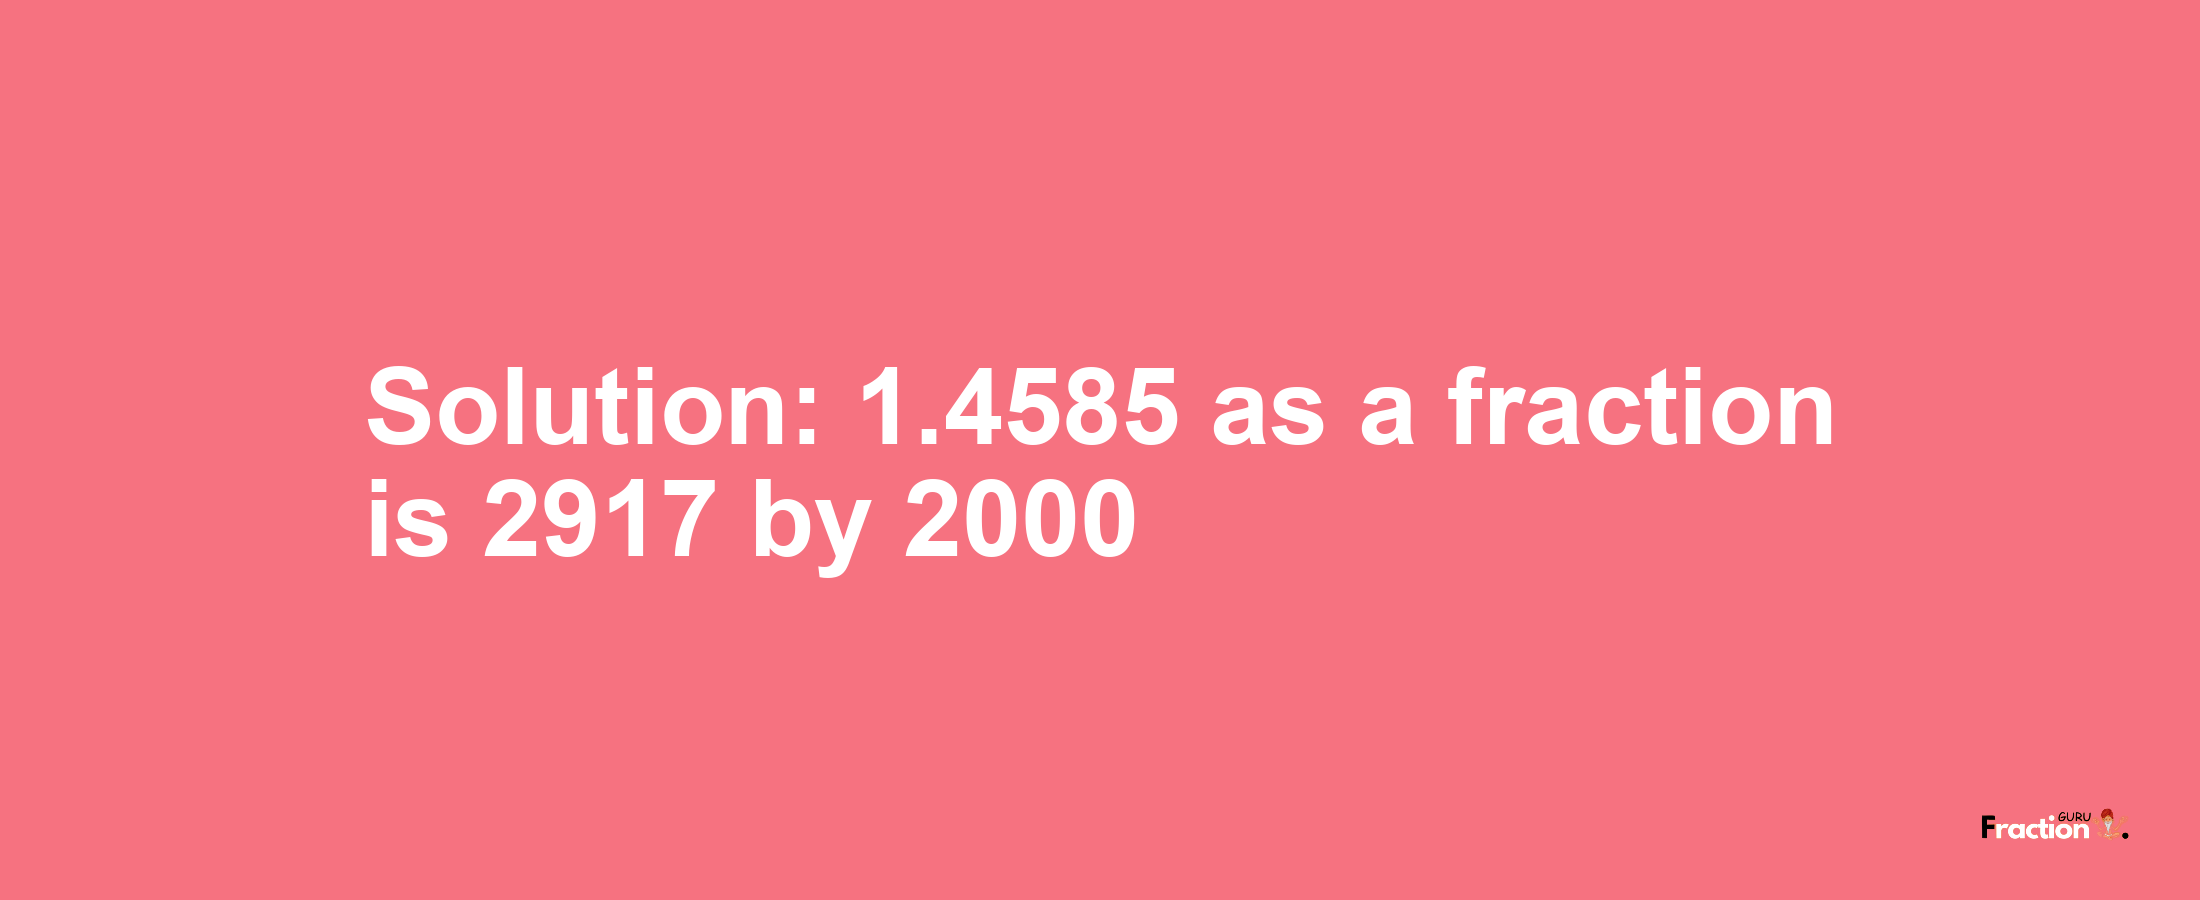 Solution:1.4585 as a fraction is 2917/2000